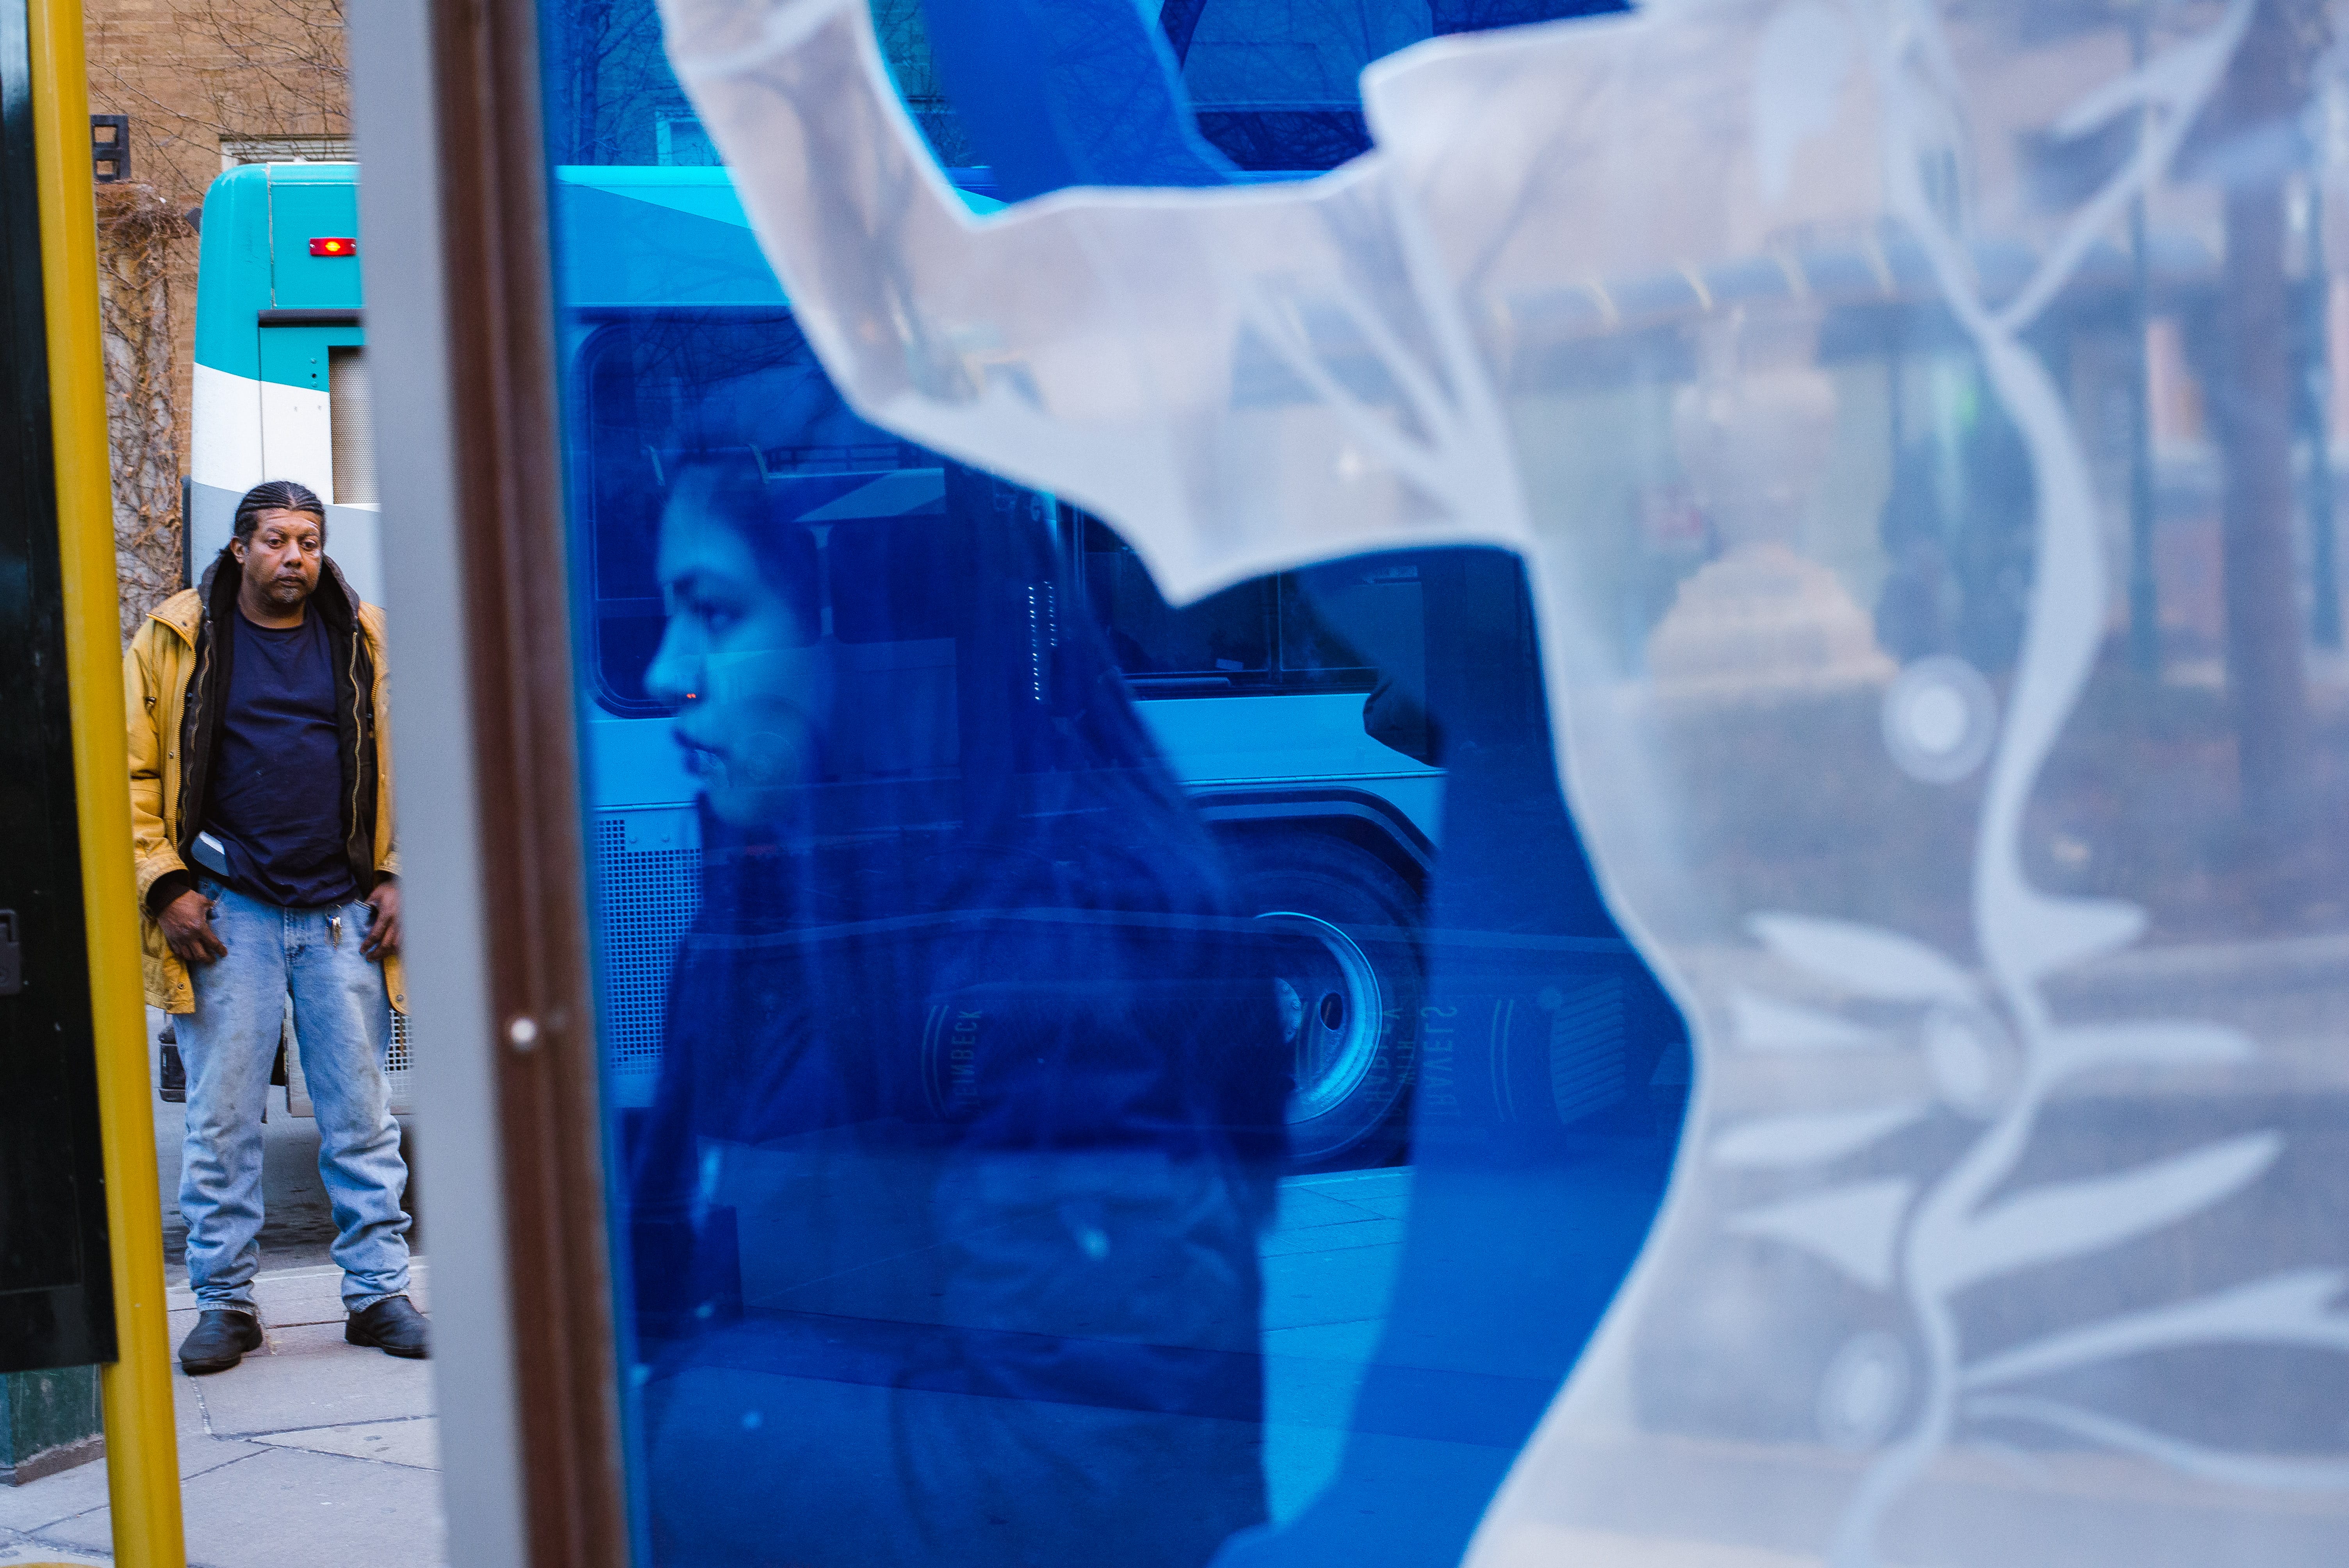 A woman behind blue glass; a man in front of a bus looking down.